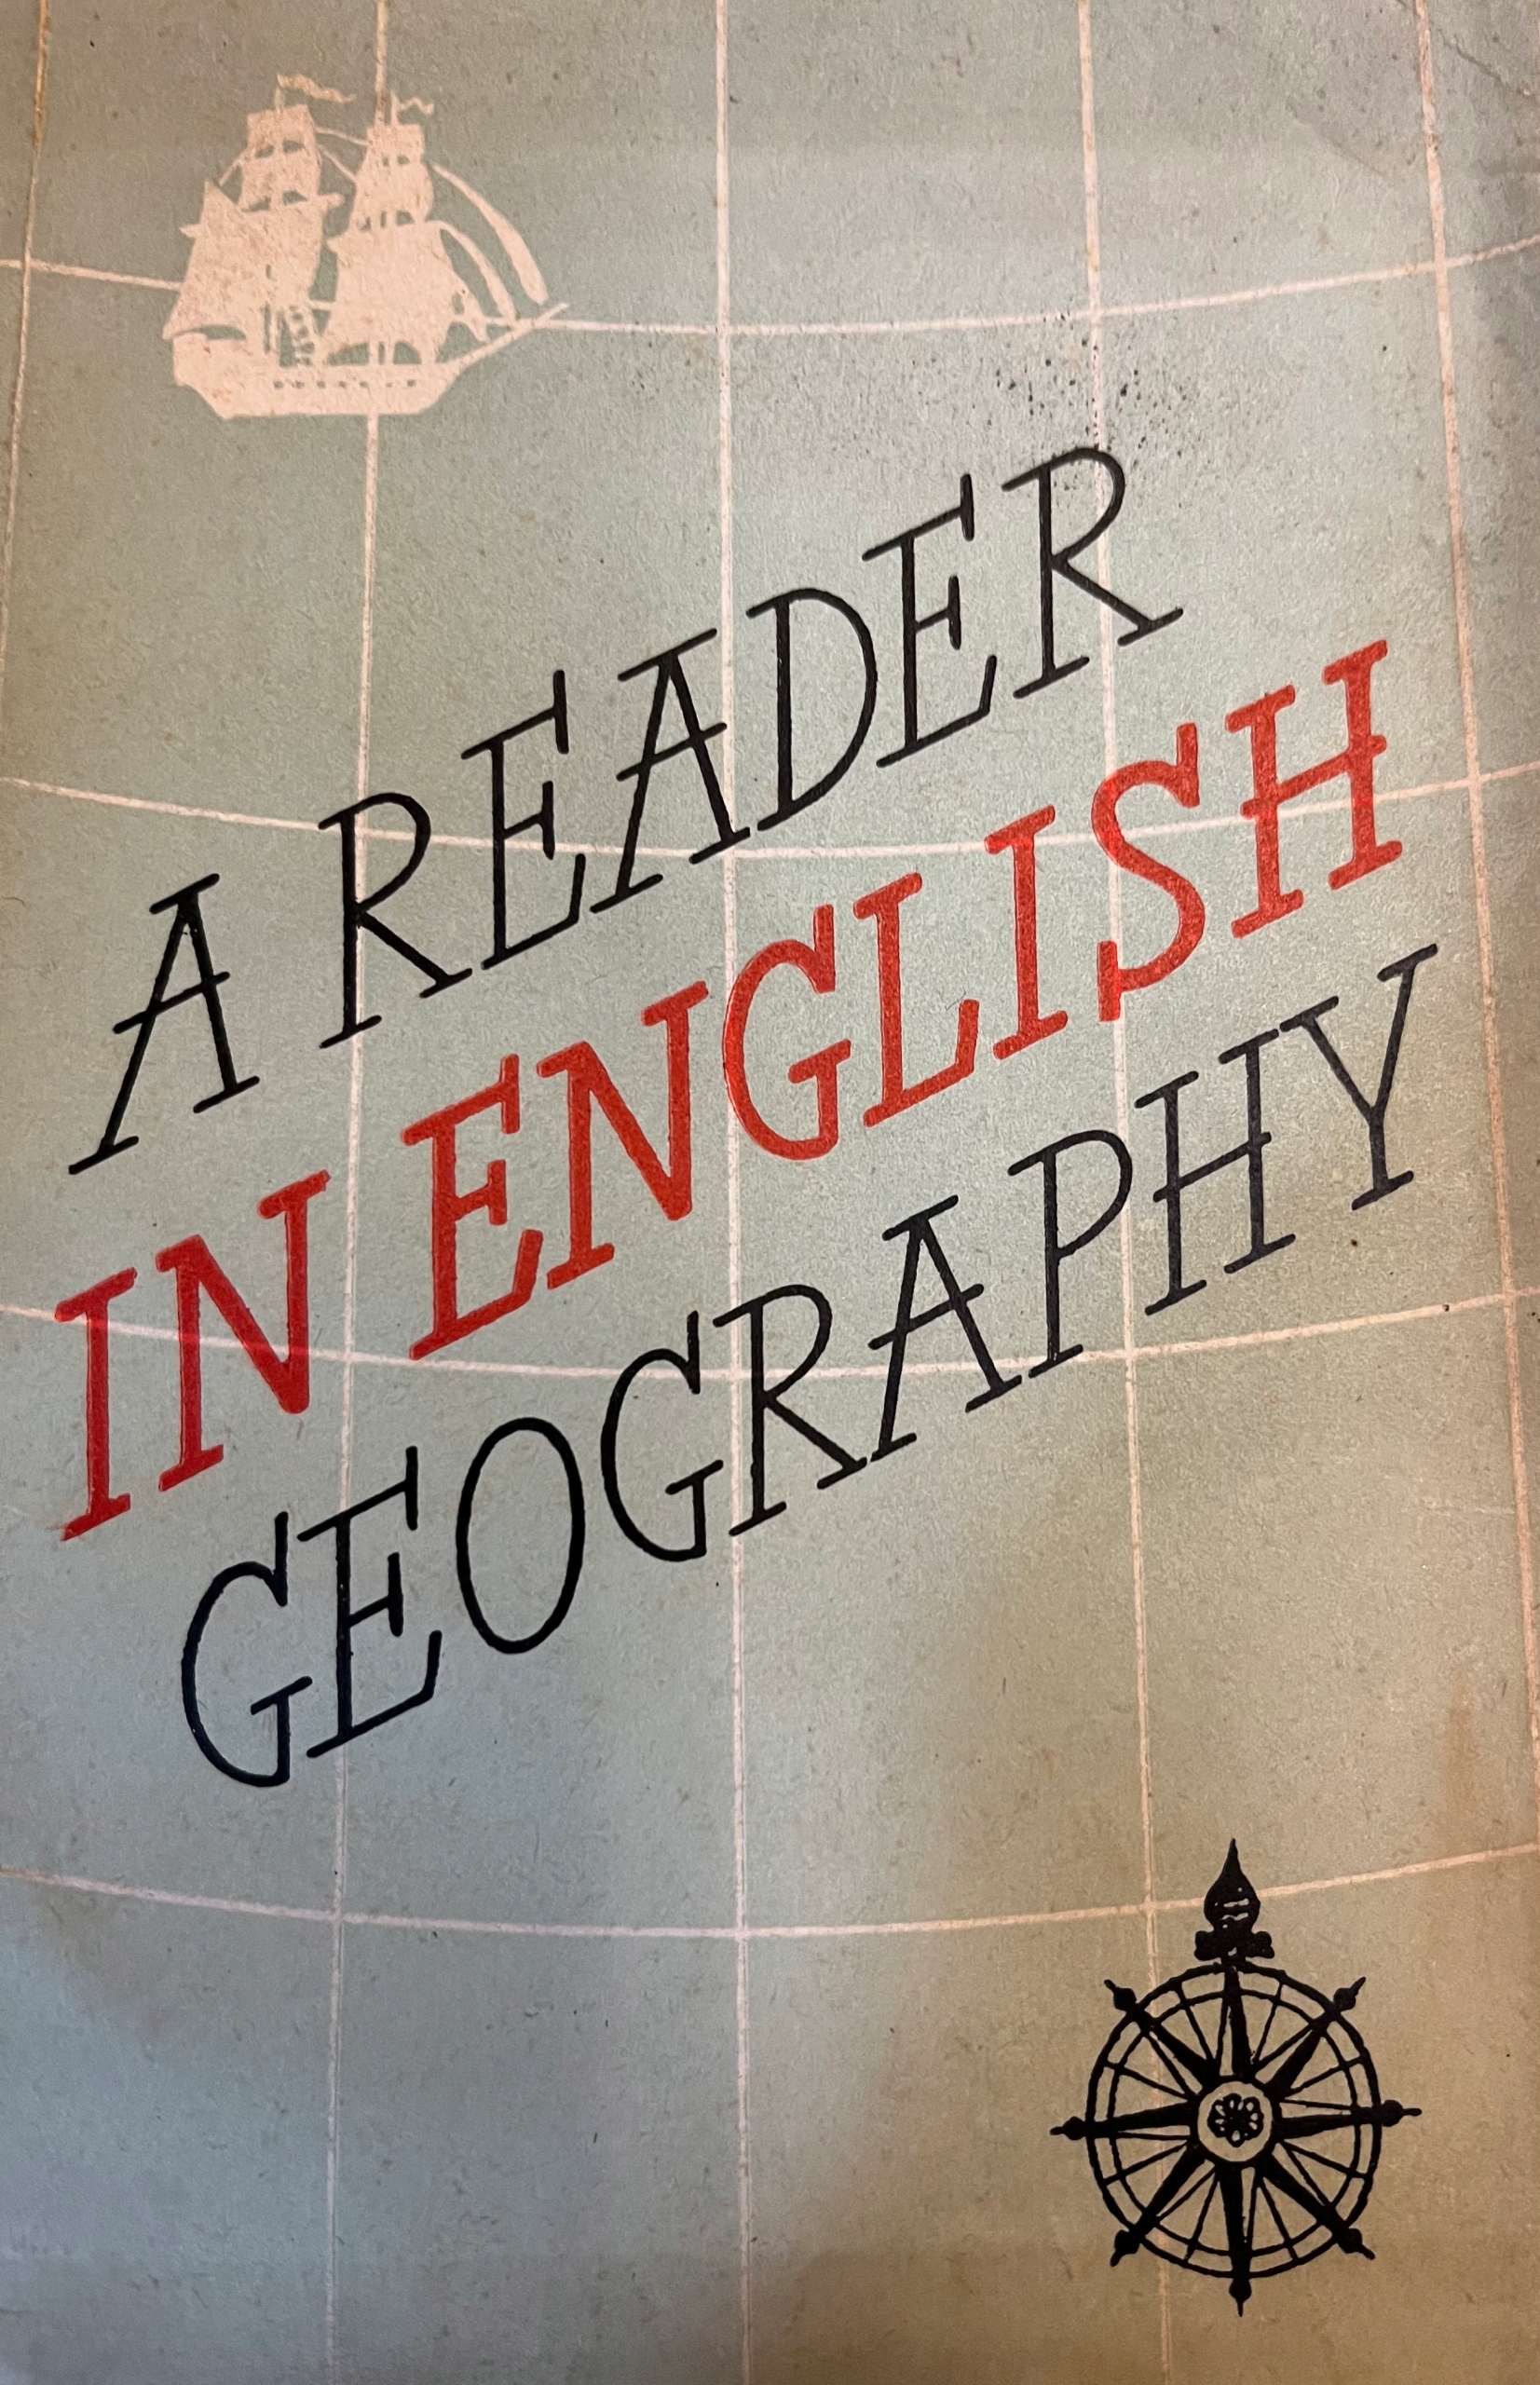 A READER IN ENGLISH GEOGRAPHY (1964, j. angielski)